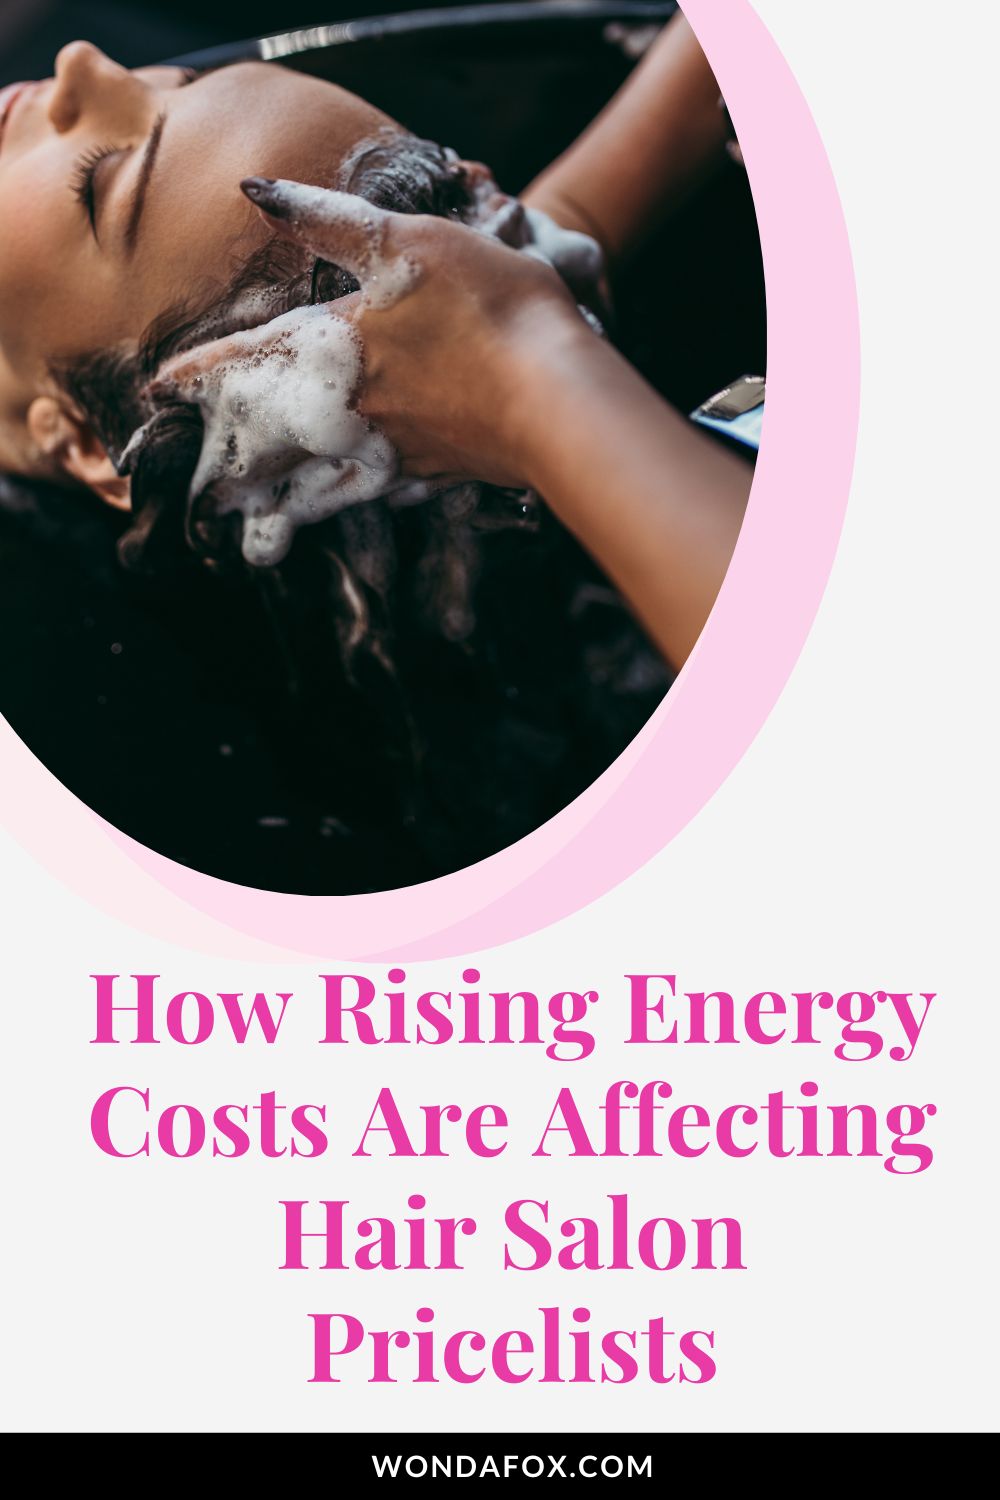 How Rising Energy Costs Are Affecting Hair Salon Pricelists